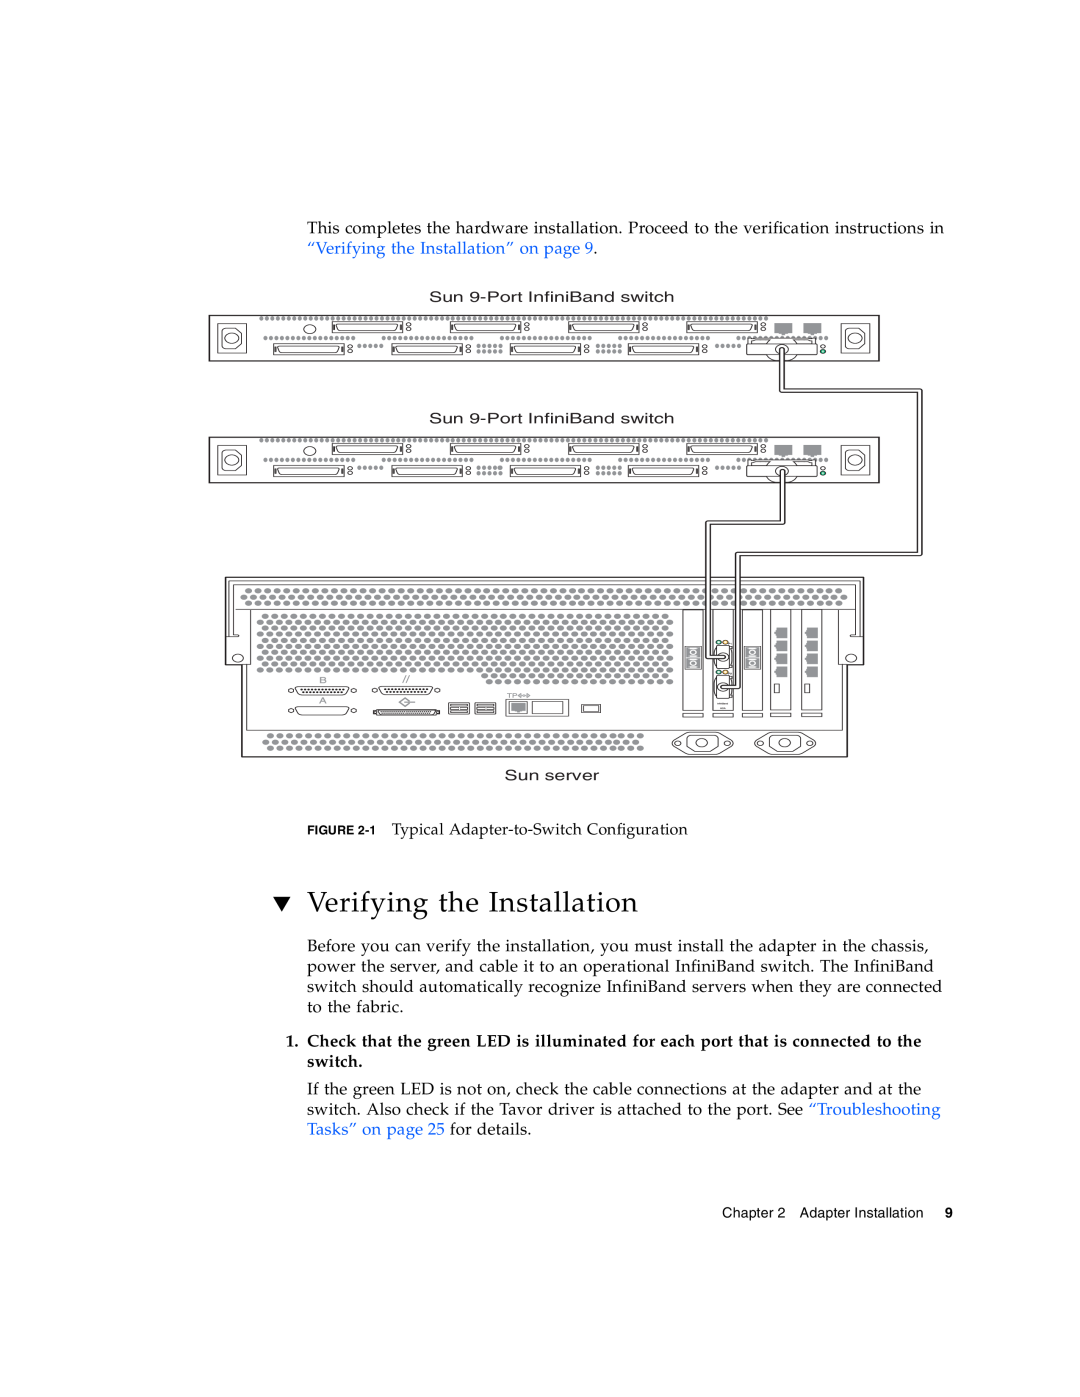 Sun Microsystems PCI manual Verifying the Installation, 1 Typical Adapter-to-Switch Configuration 